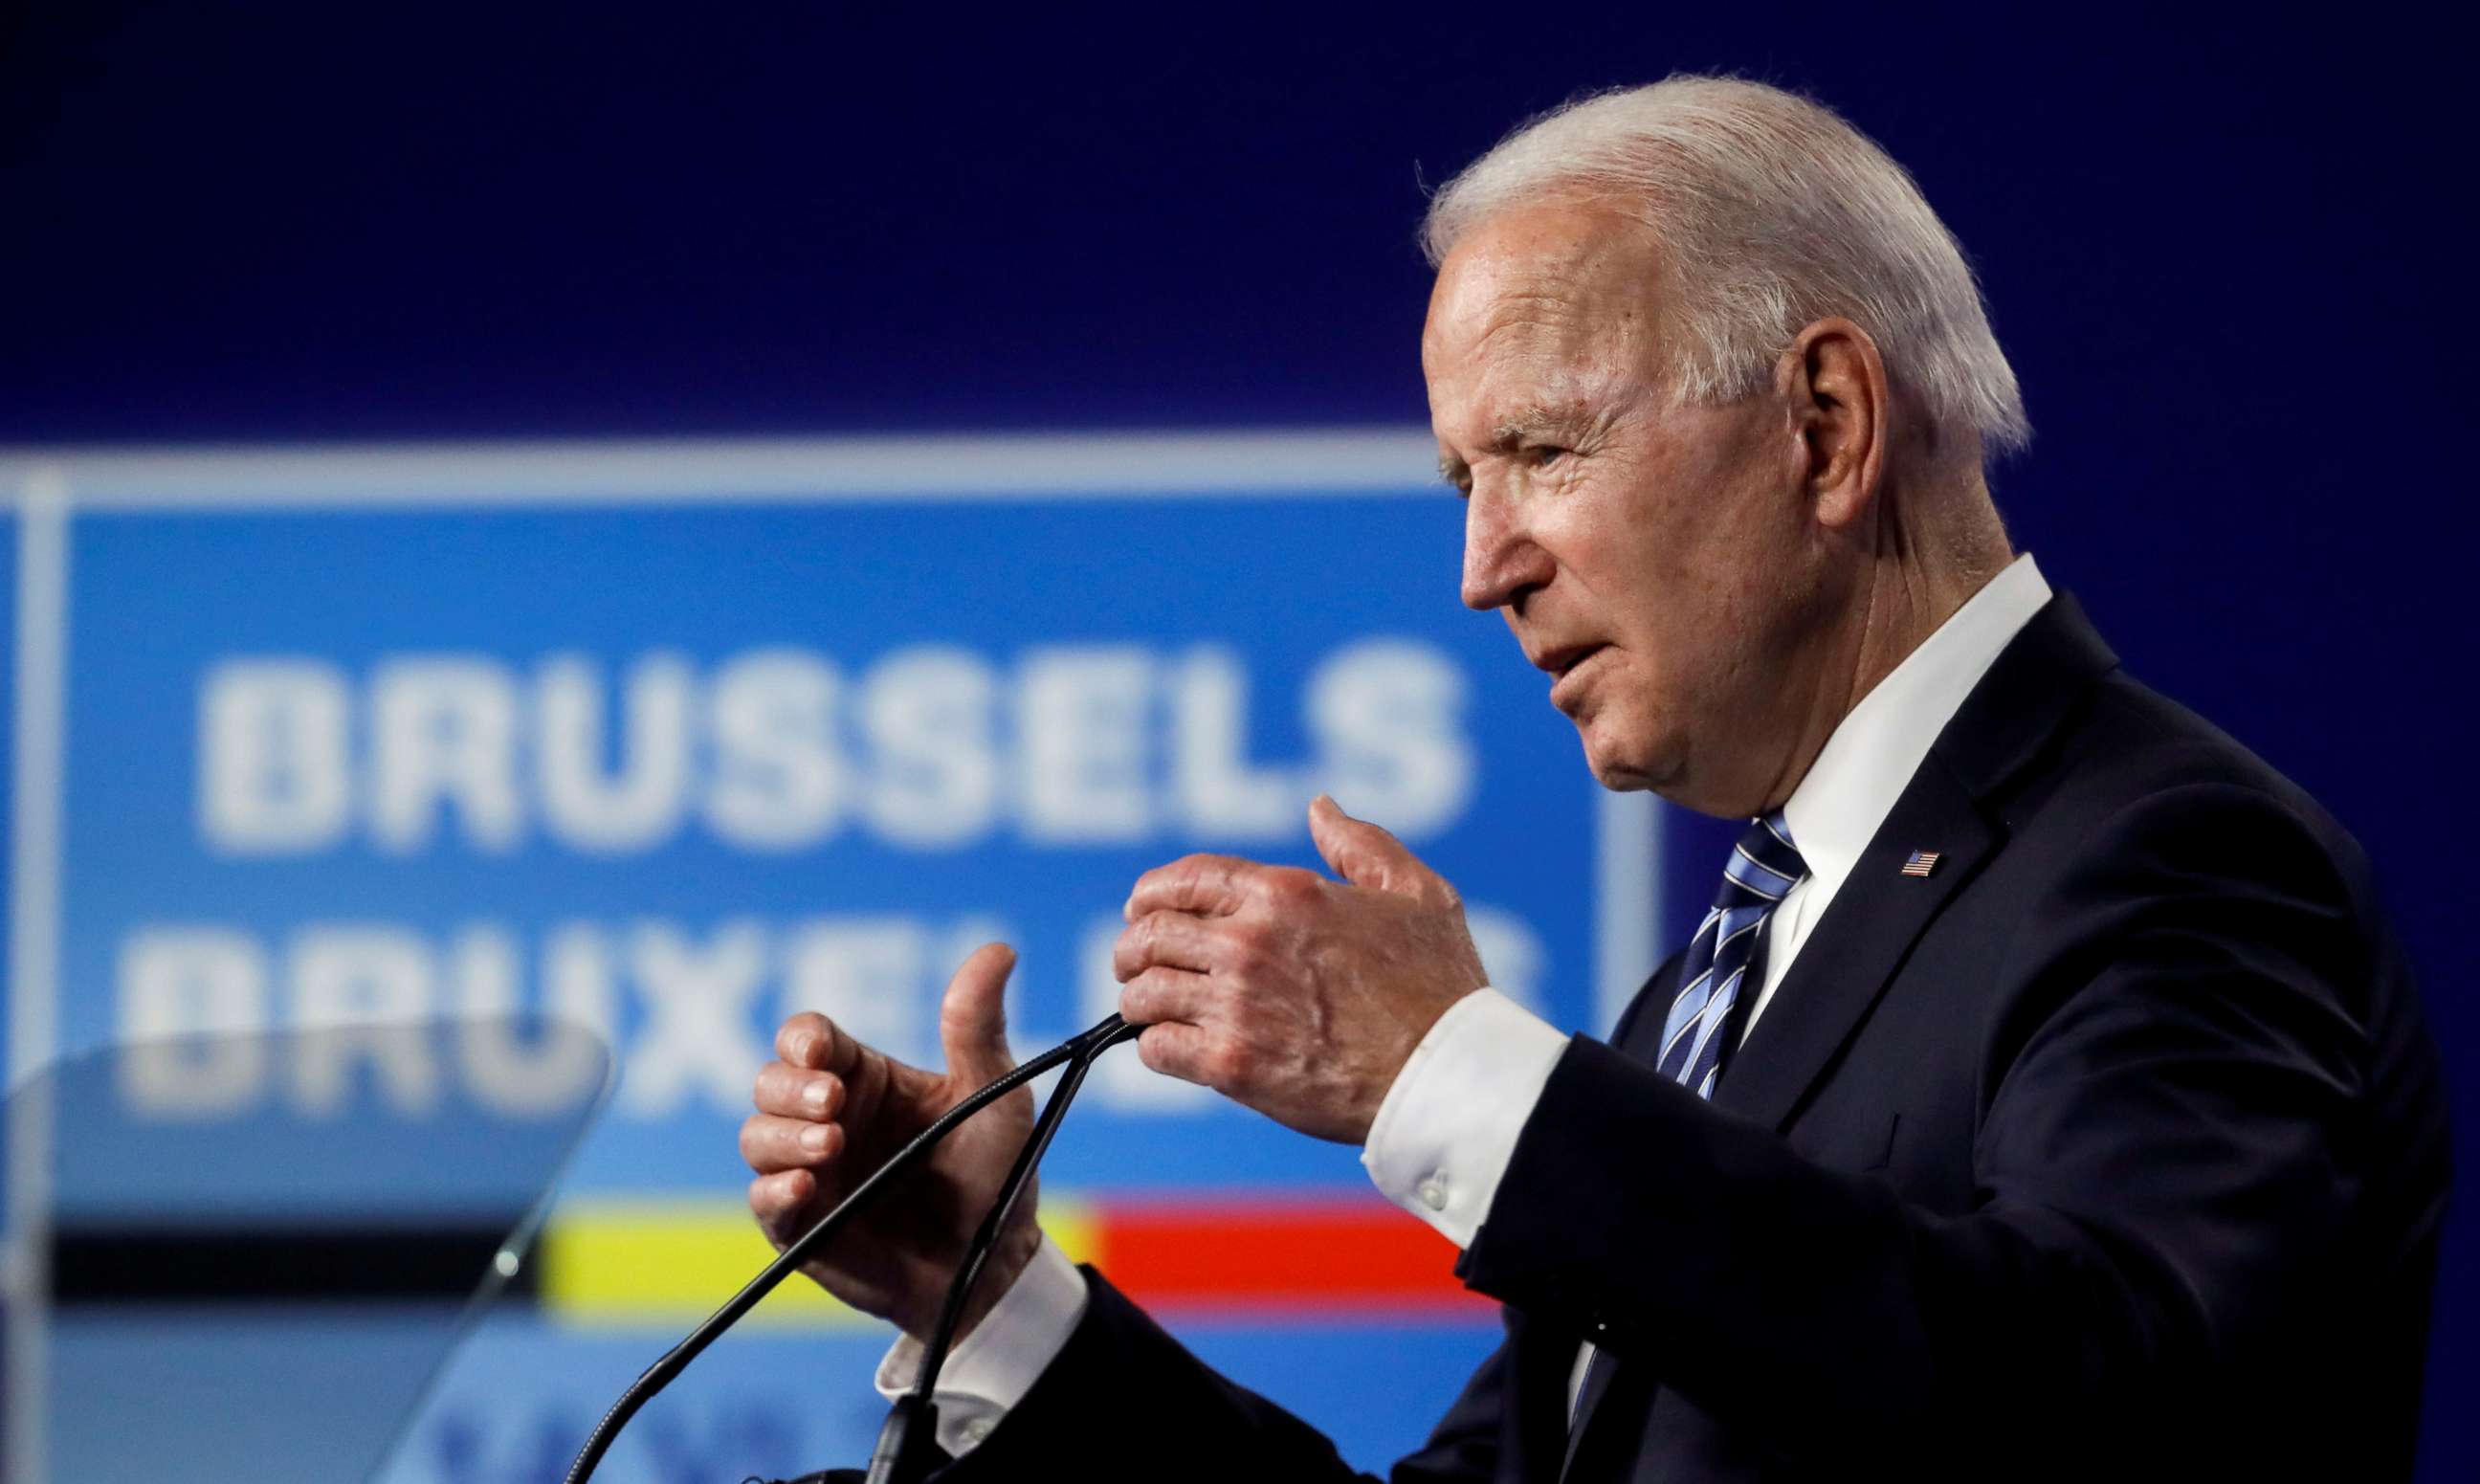 FILE PHOTO: U.S. President Joe Biden holds a news conference during a NATO summit at the North Atlantic Treaty Organization (NATO) headquarters in Brussels, Belgium June 14, 2021. Olivier Hoslet/Pool via REUTERS/File Photo